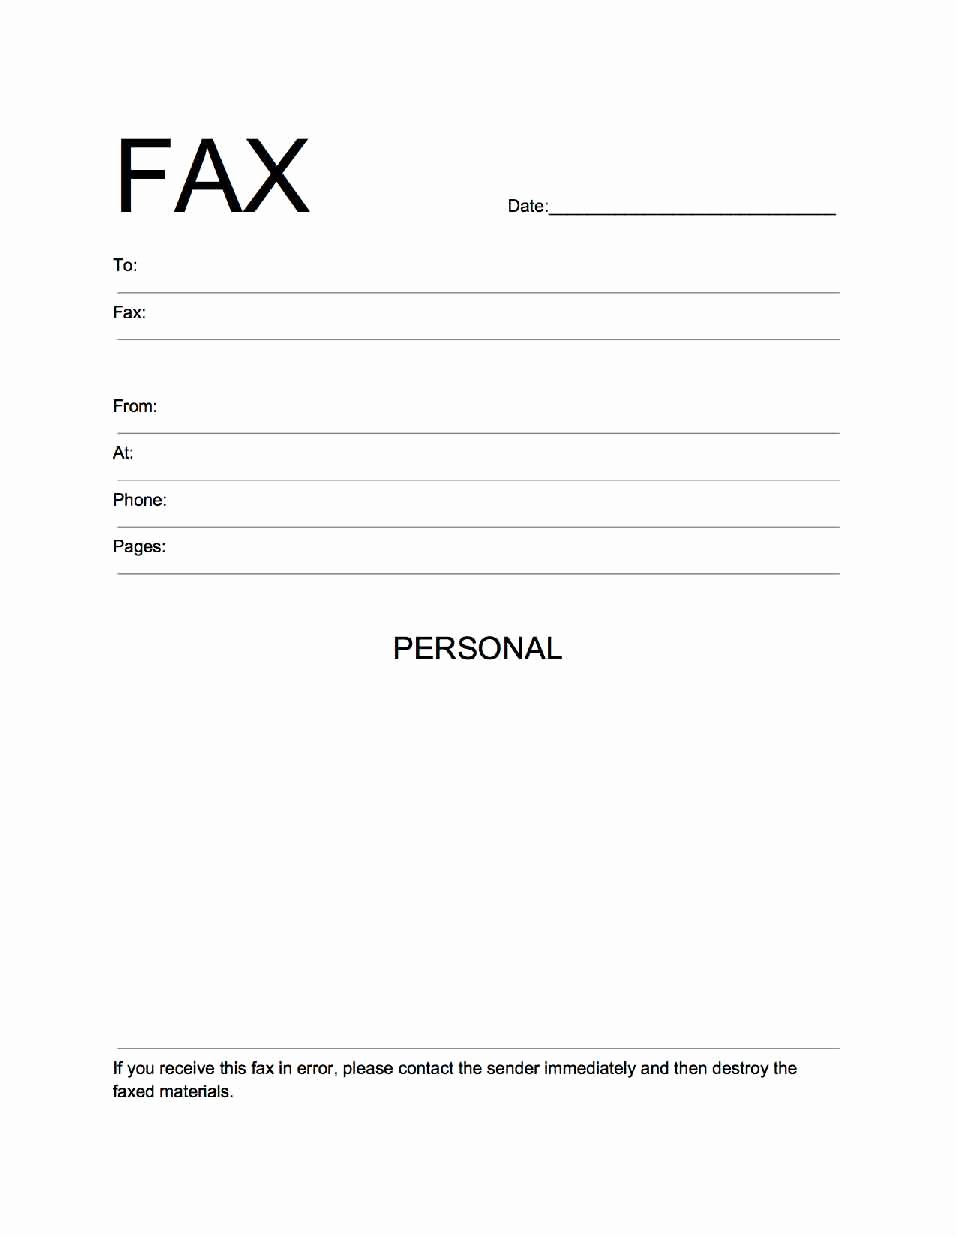 Fax Front Cover Sheet Template Elegant Free Fax Cover Sheet Template Download